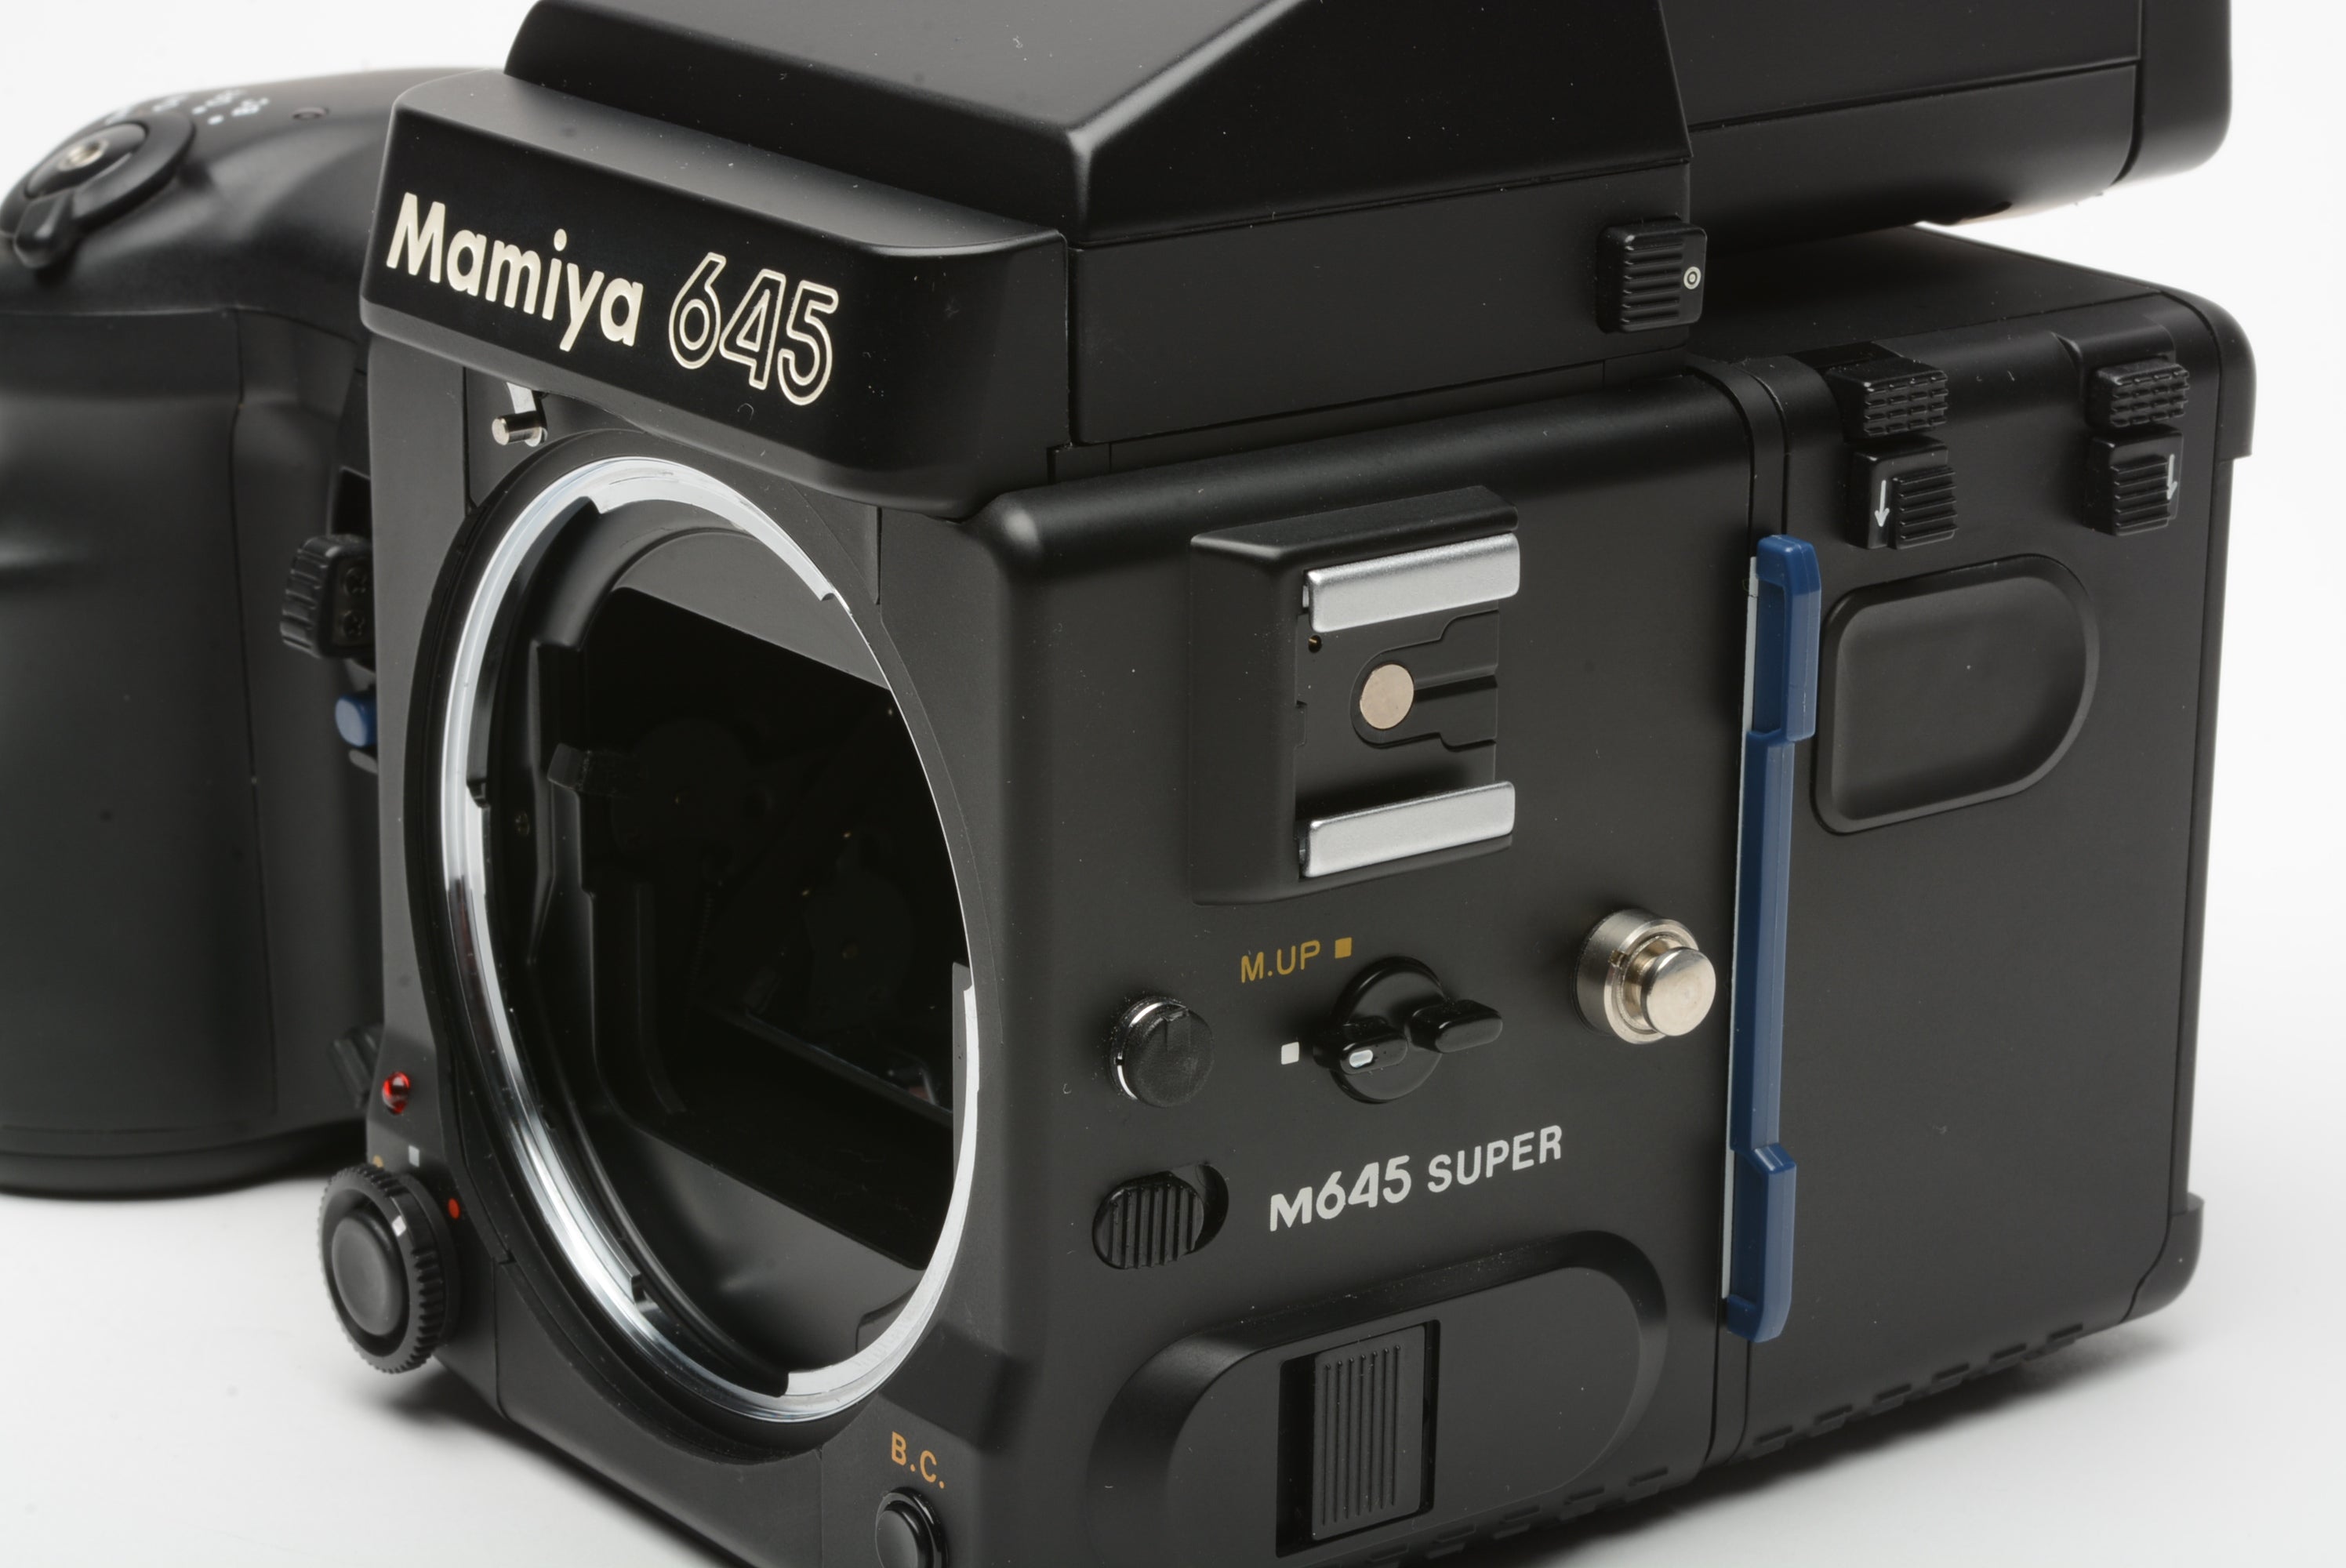 Mamiya 645 Super body, grip, AE prism finder and 120 back, tested